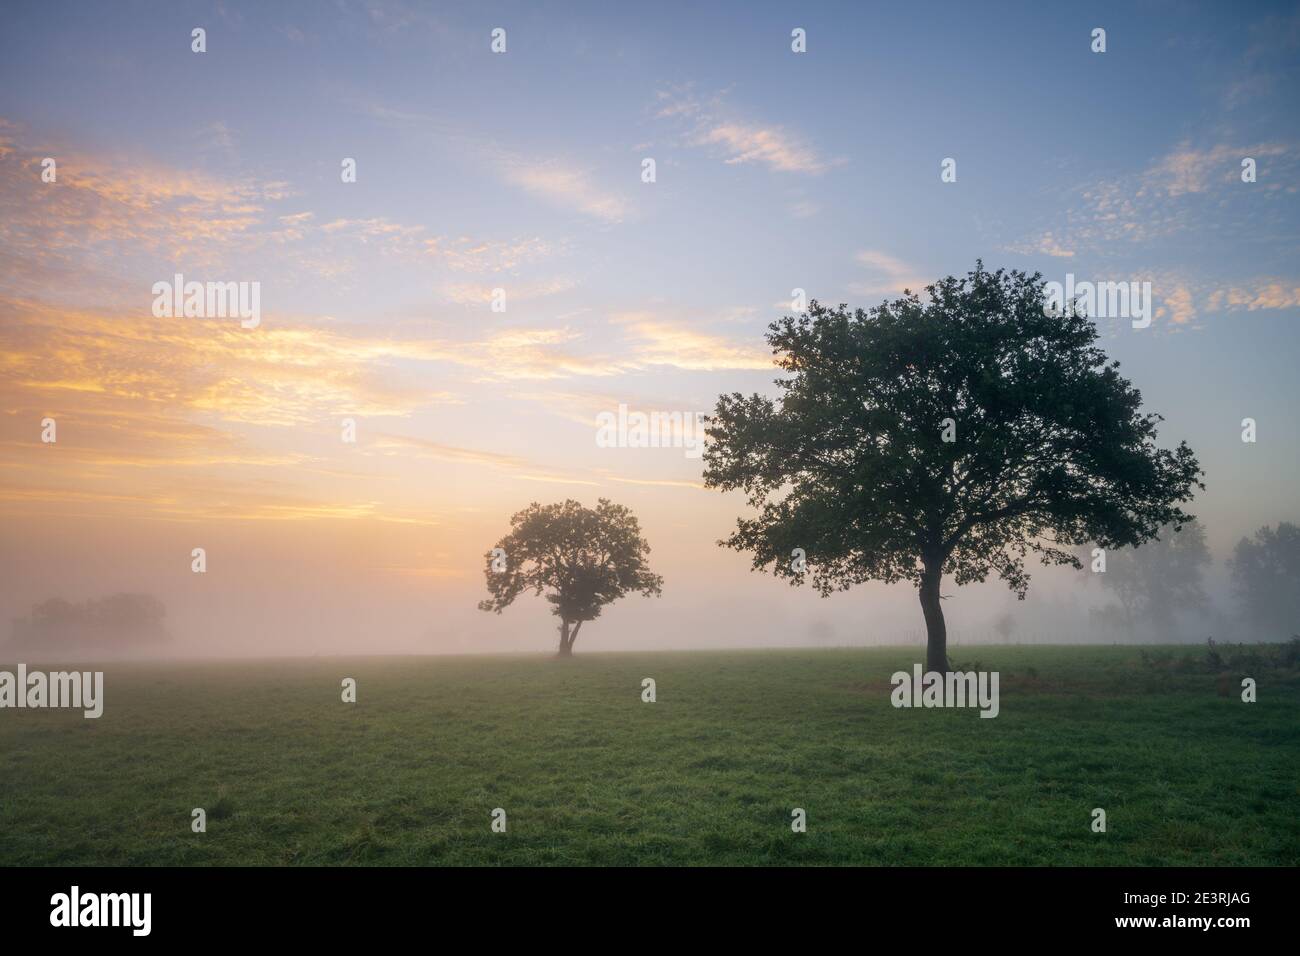 A foggy sunrise in the Poitou-Charentes countryside near Confolens with two trees visible through the low hanging mist. Stock Photo